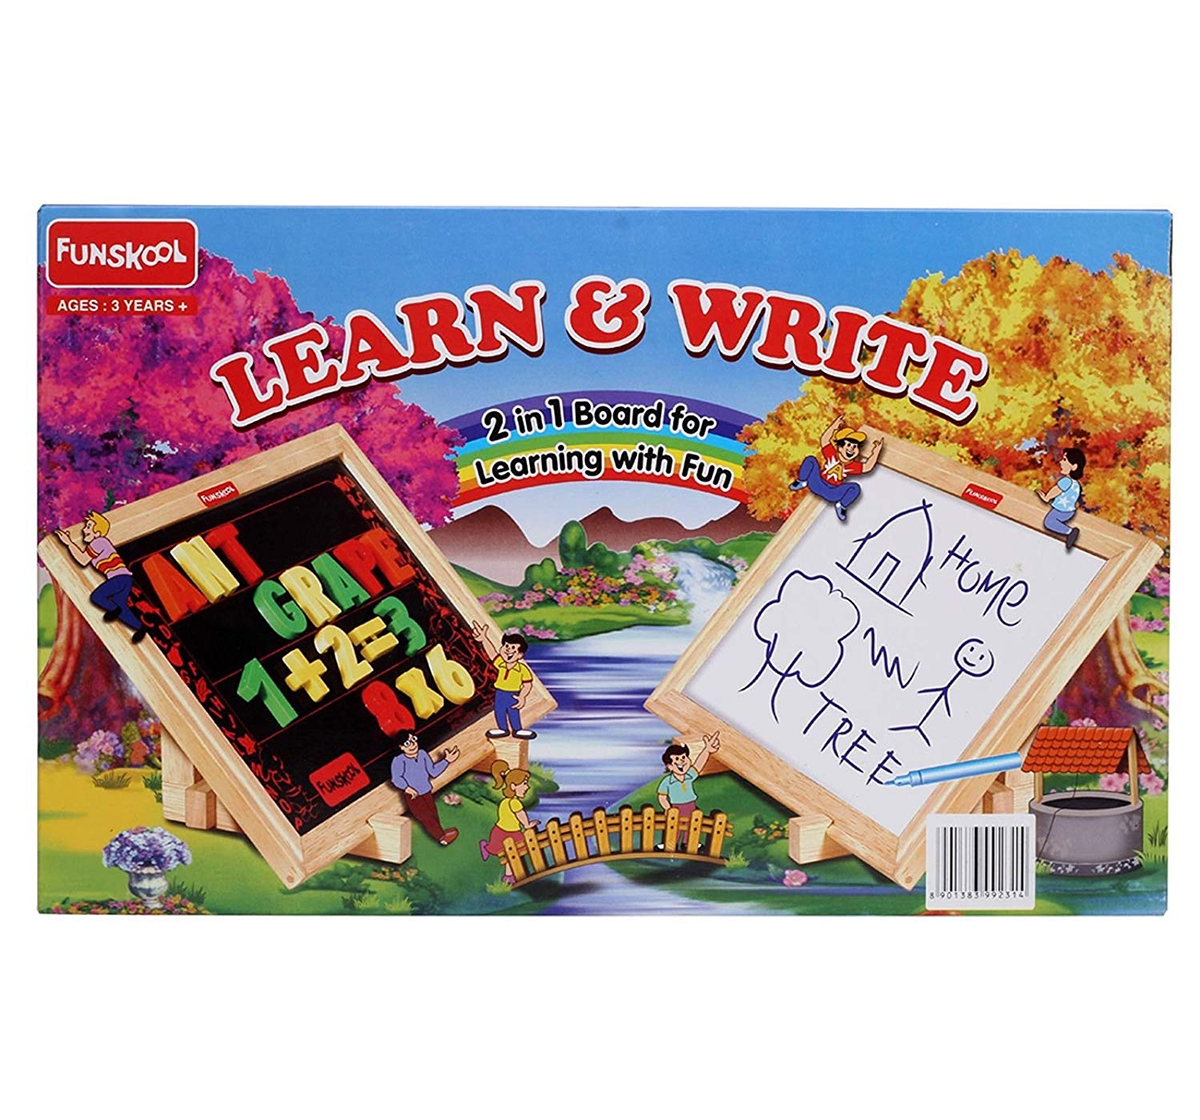 Giggles | Giggles Funskool Learn And Write Early Learner Toys for Kids age 3Y+ (White) 2